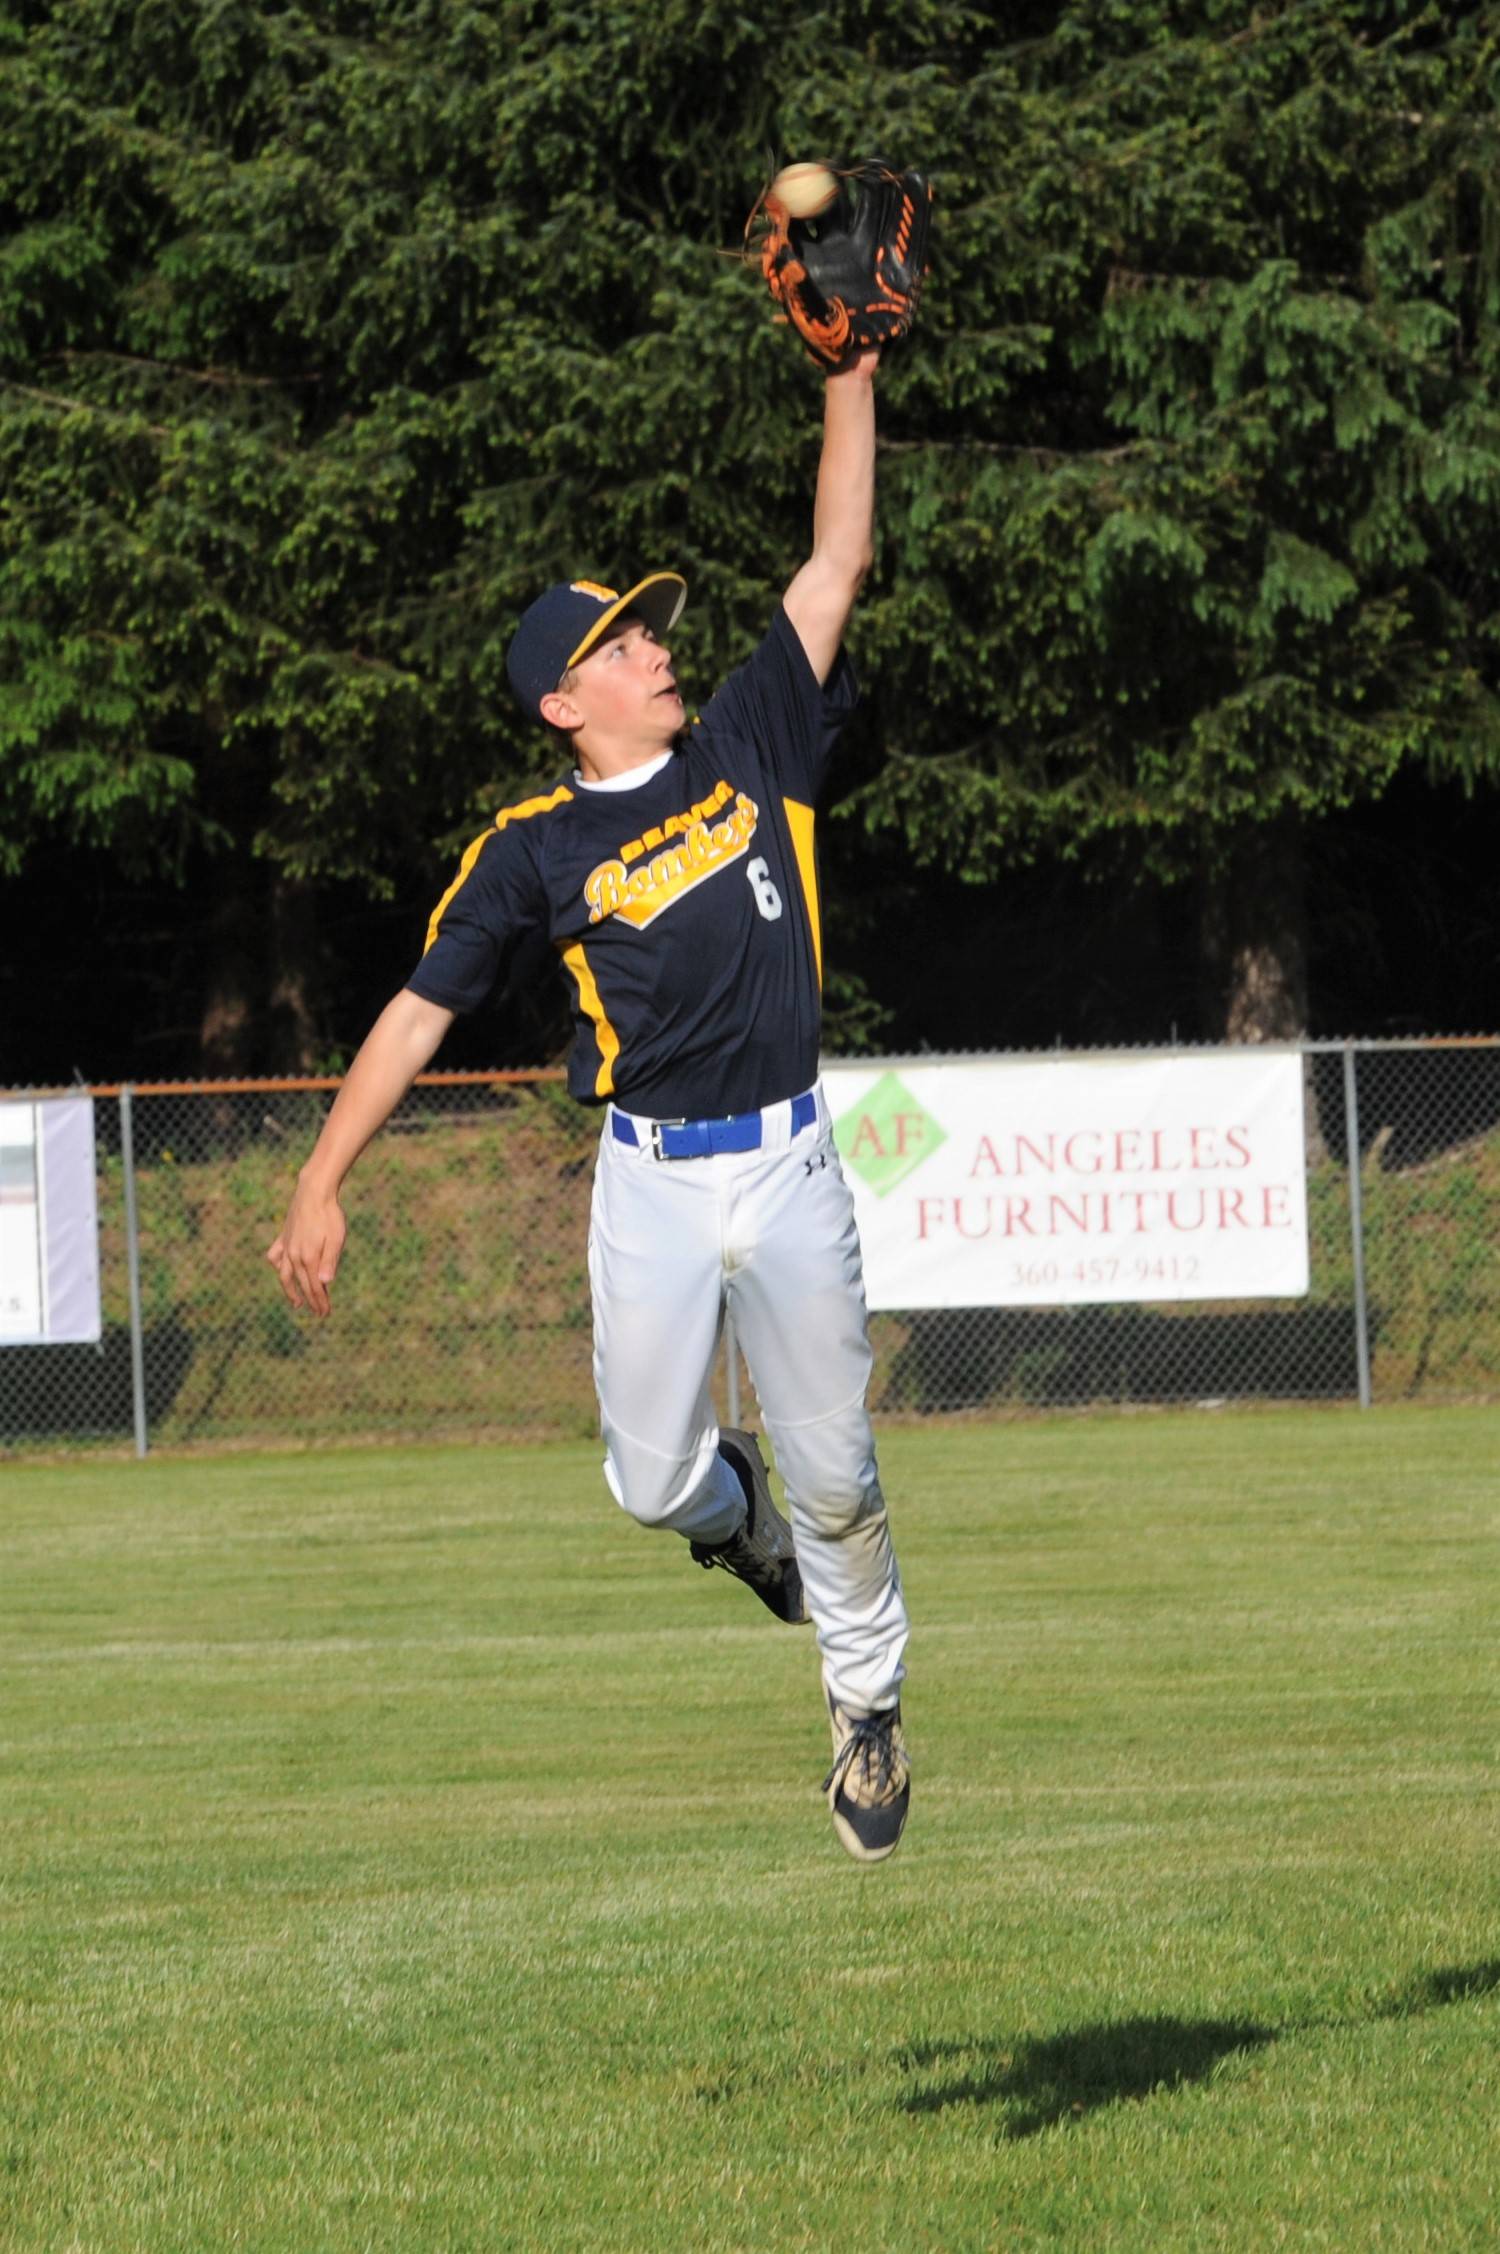 Beaver shortstop Alex Pursley made this leaping catch of a line drive for an out against Forks. Photo by Lonnie Archibald